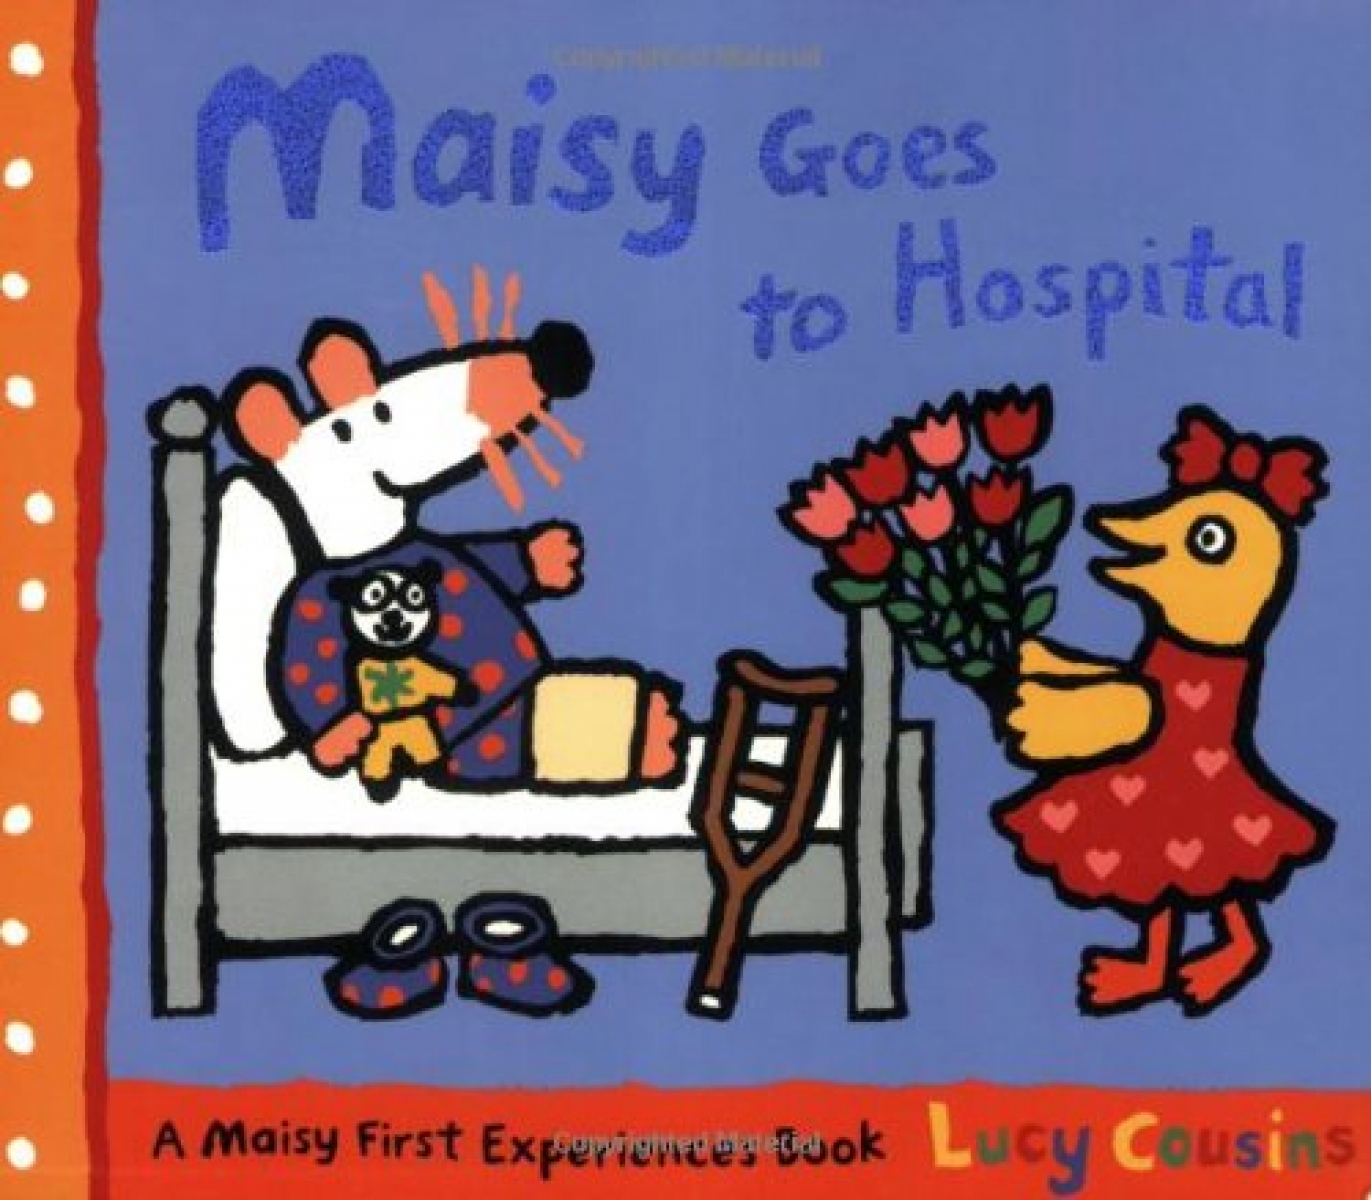 Cousins Lucy Maisy goes to hospital 